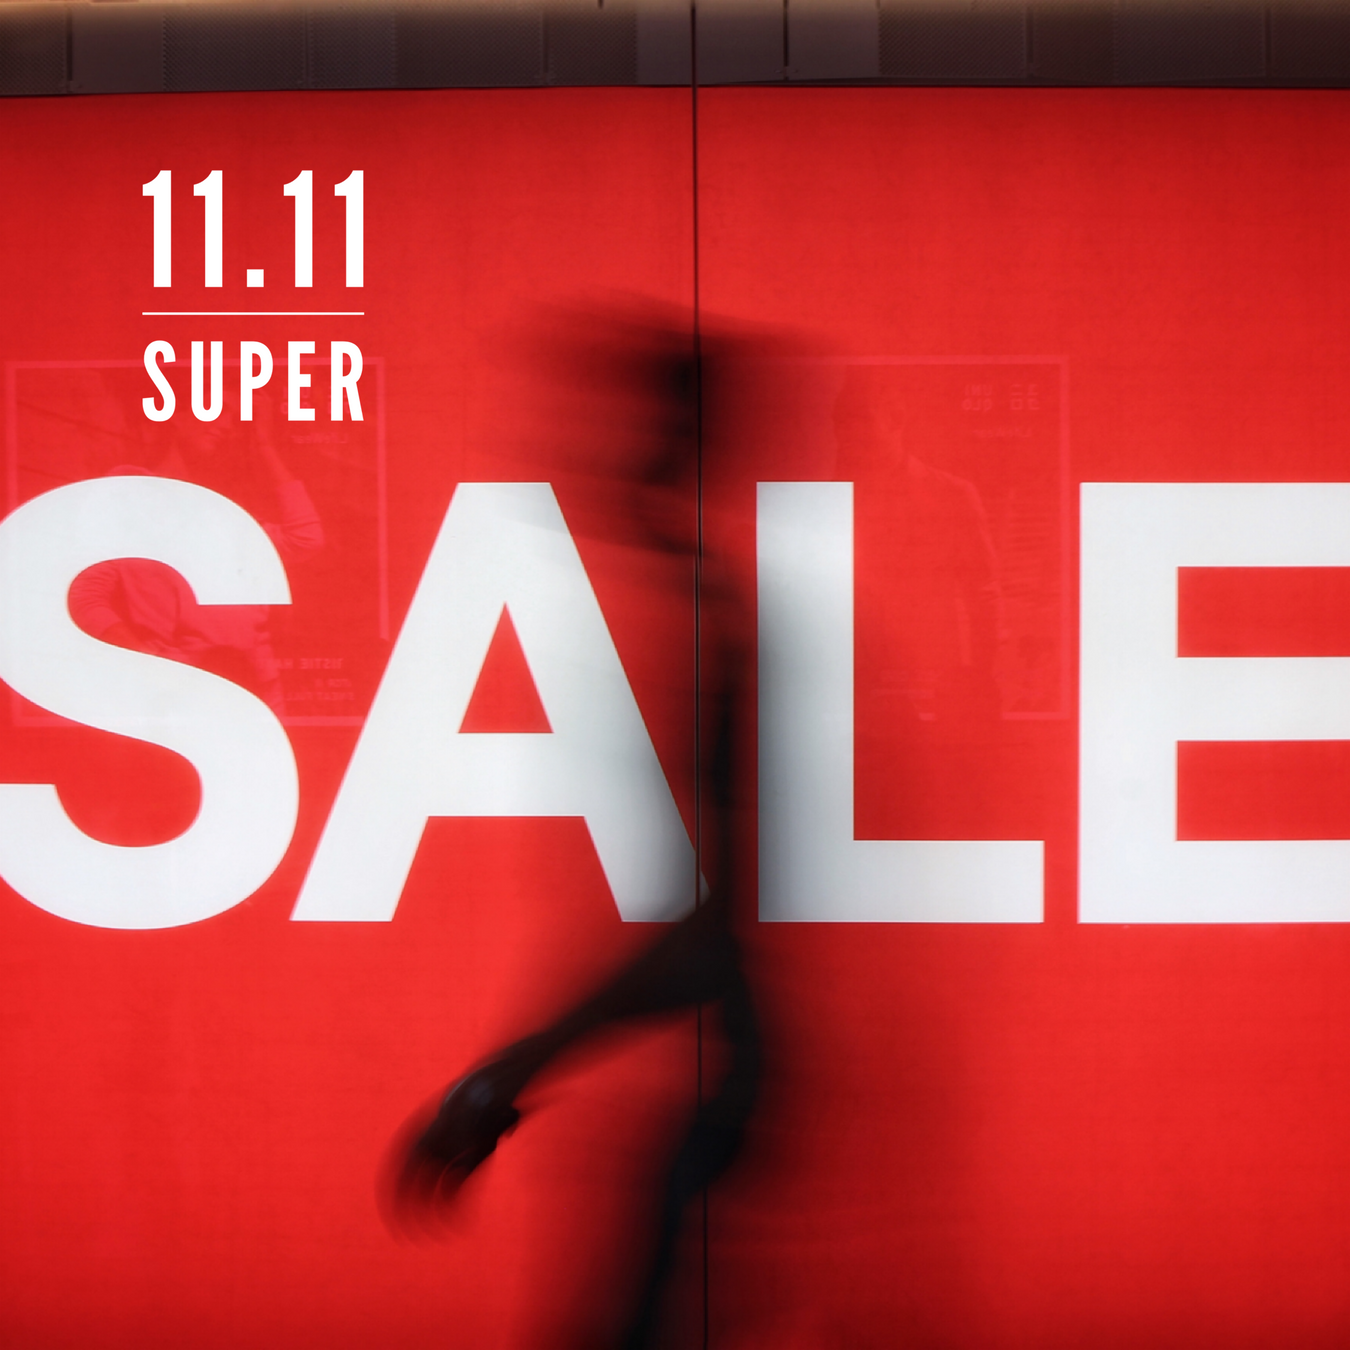 11.11 Singles' Day Super Sale enjoy 5% off on these items